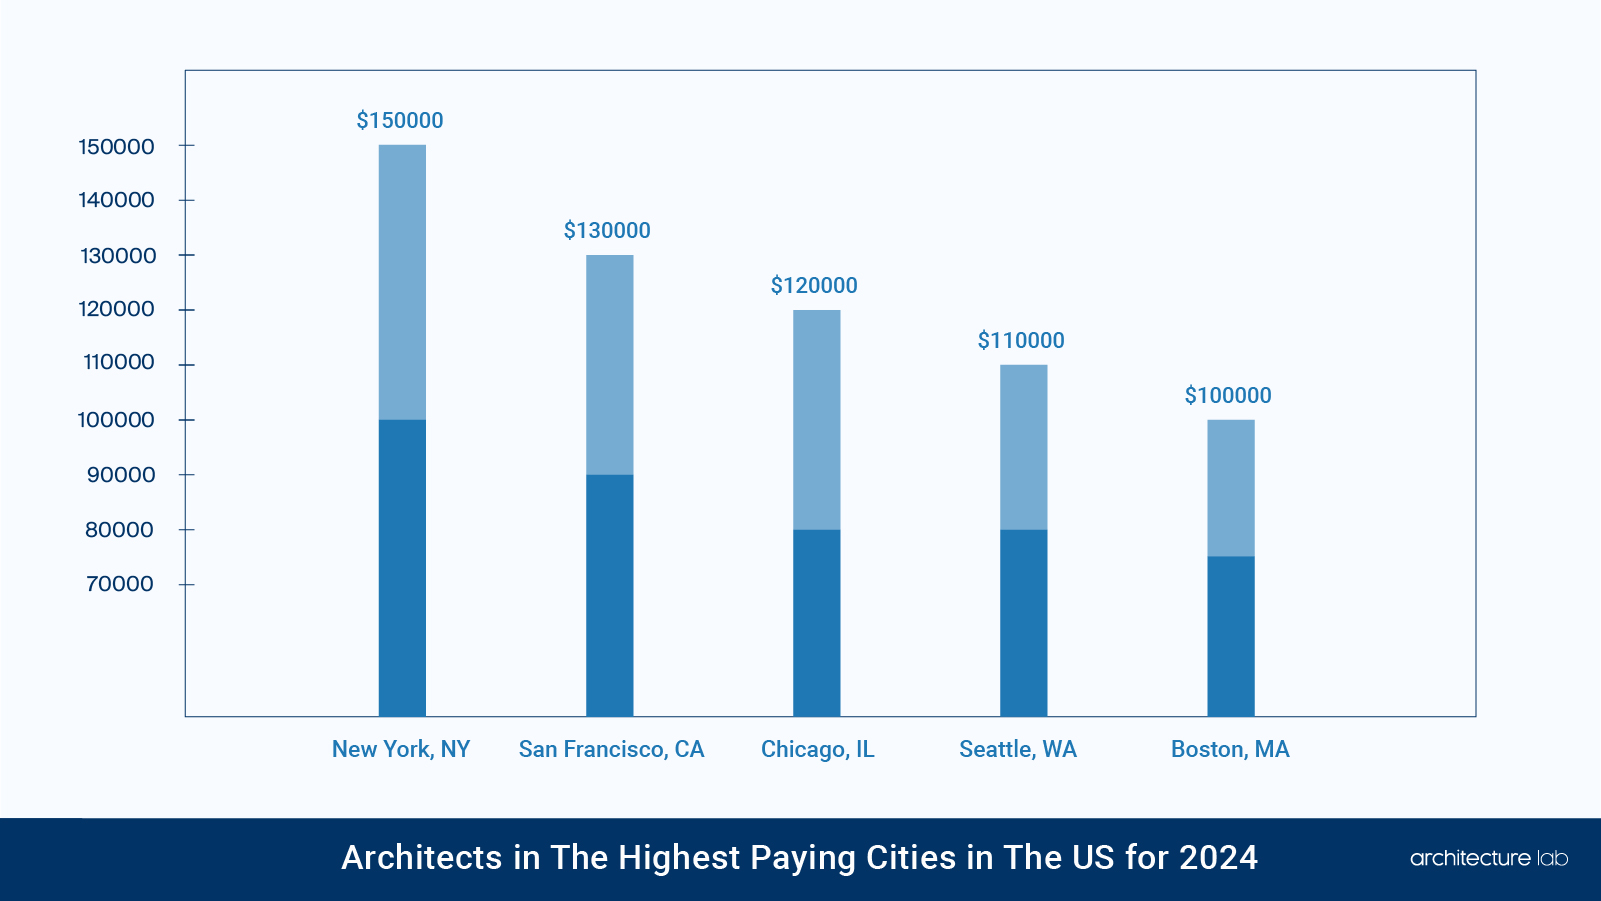 What are the highest-paying cities for architects in the us for 2024?